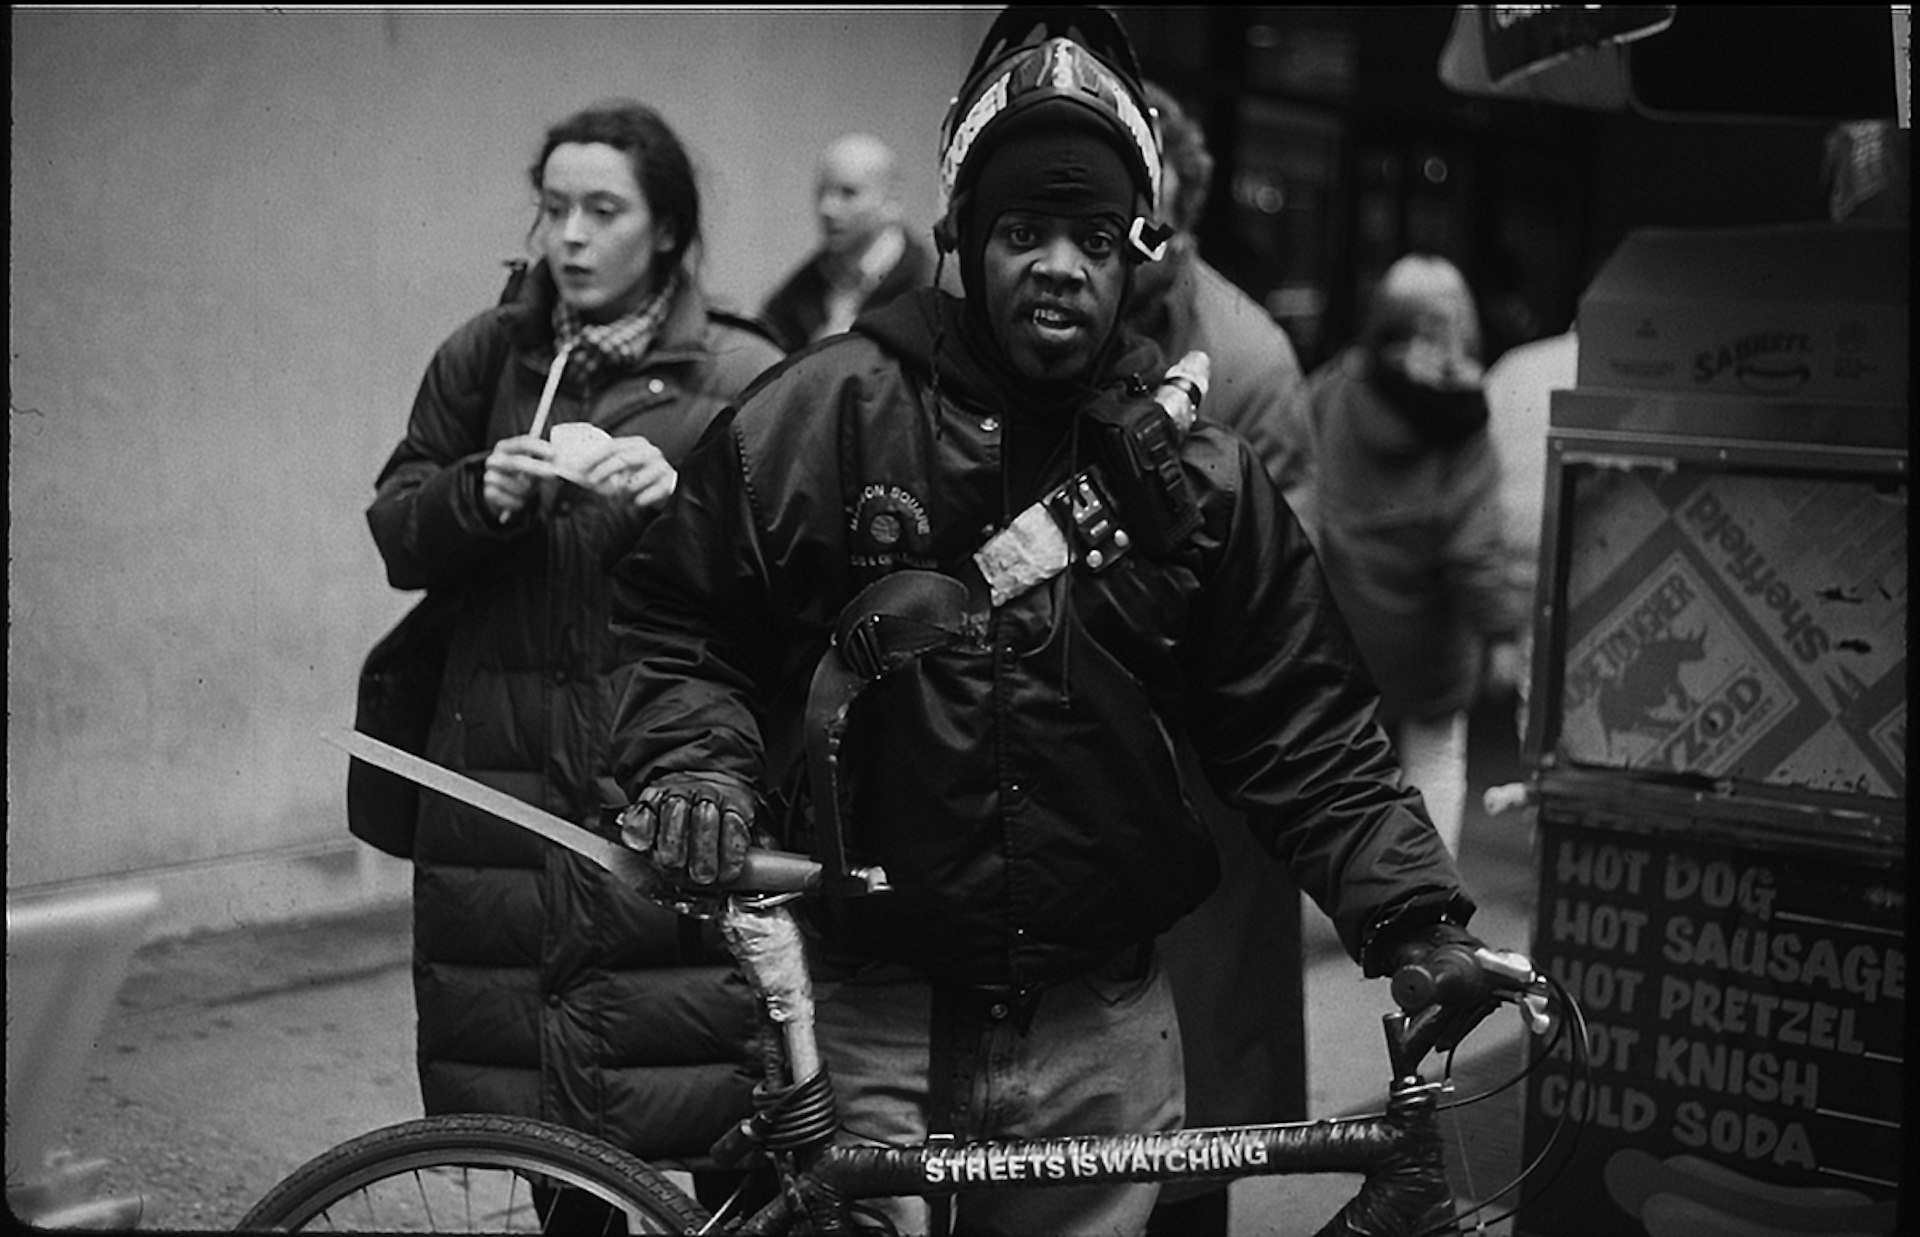 On the move with NYC bike messengers in the ‘90s